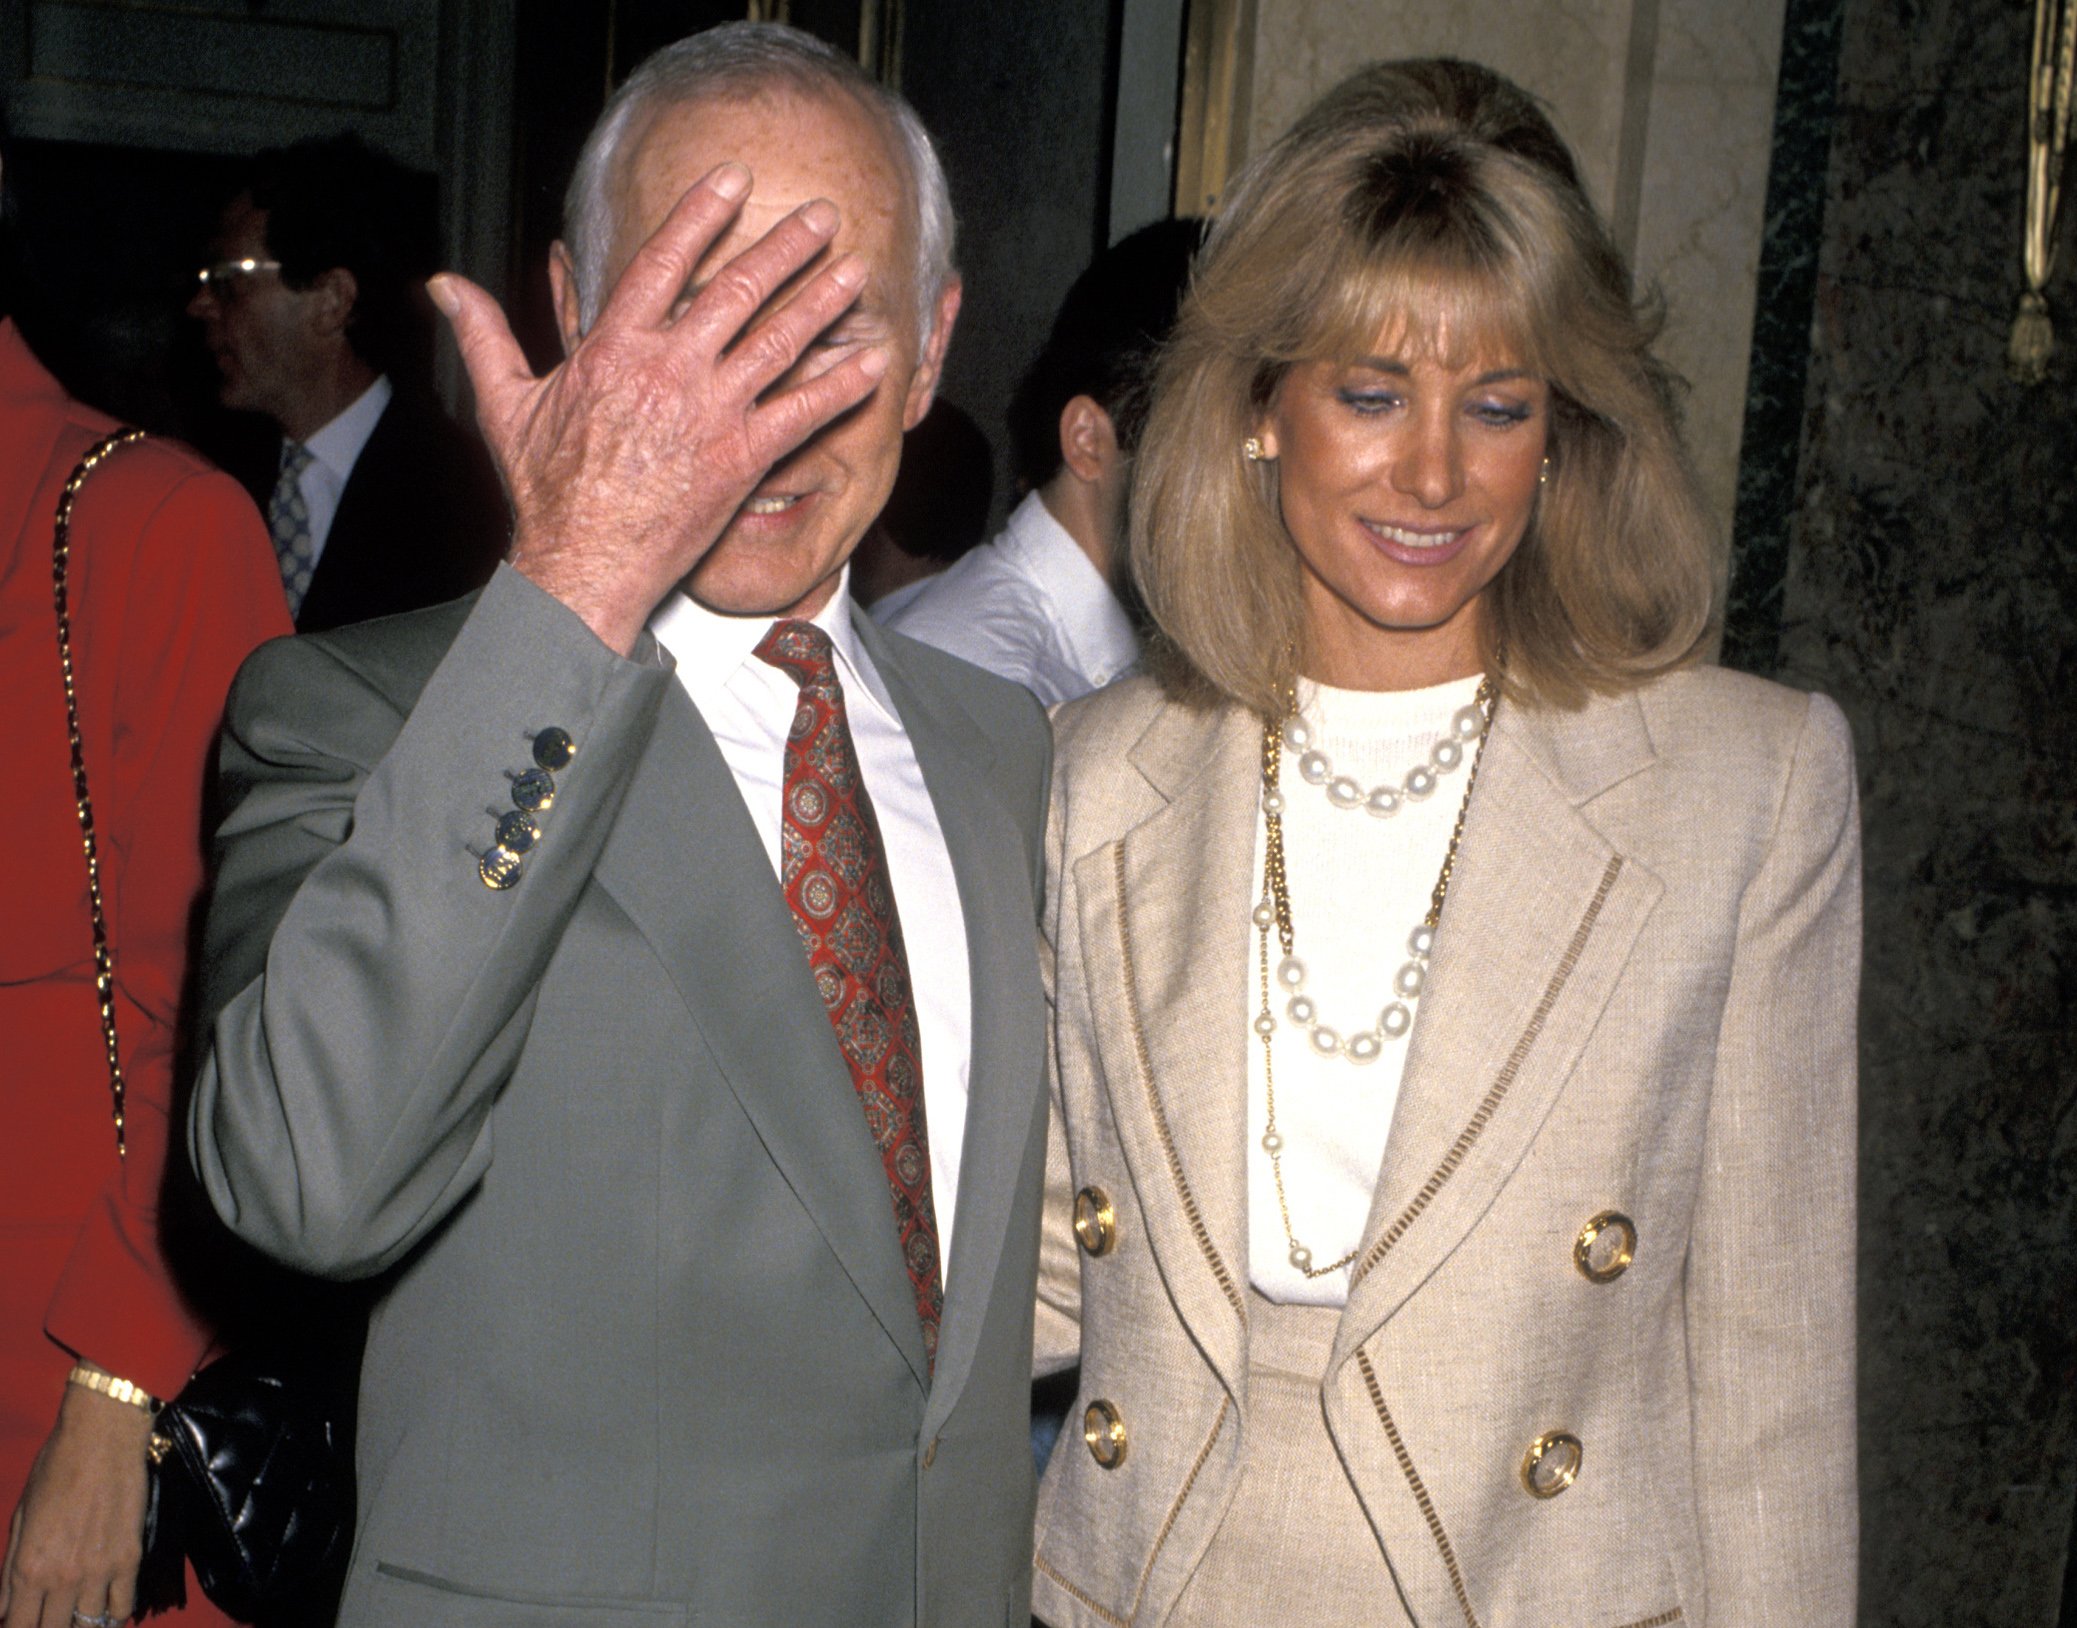 Johnny Carson in a gray suit holding a hand in front of his face while walking with wife, Alexis, in 1993